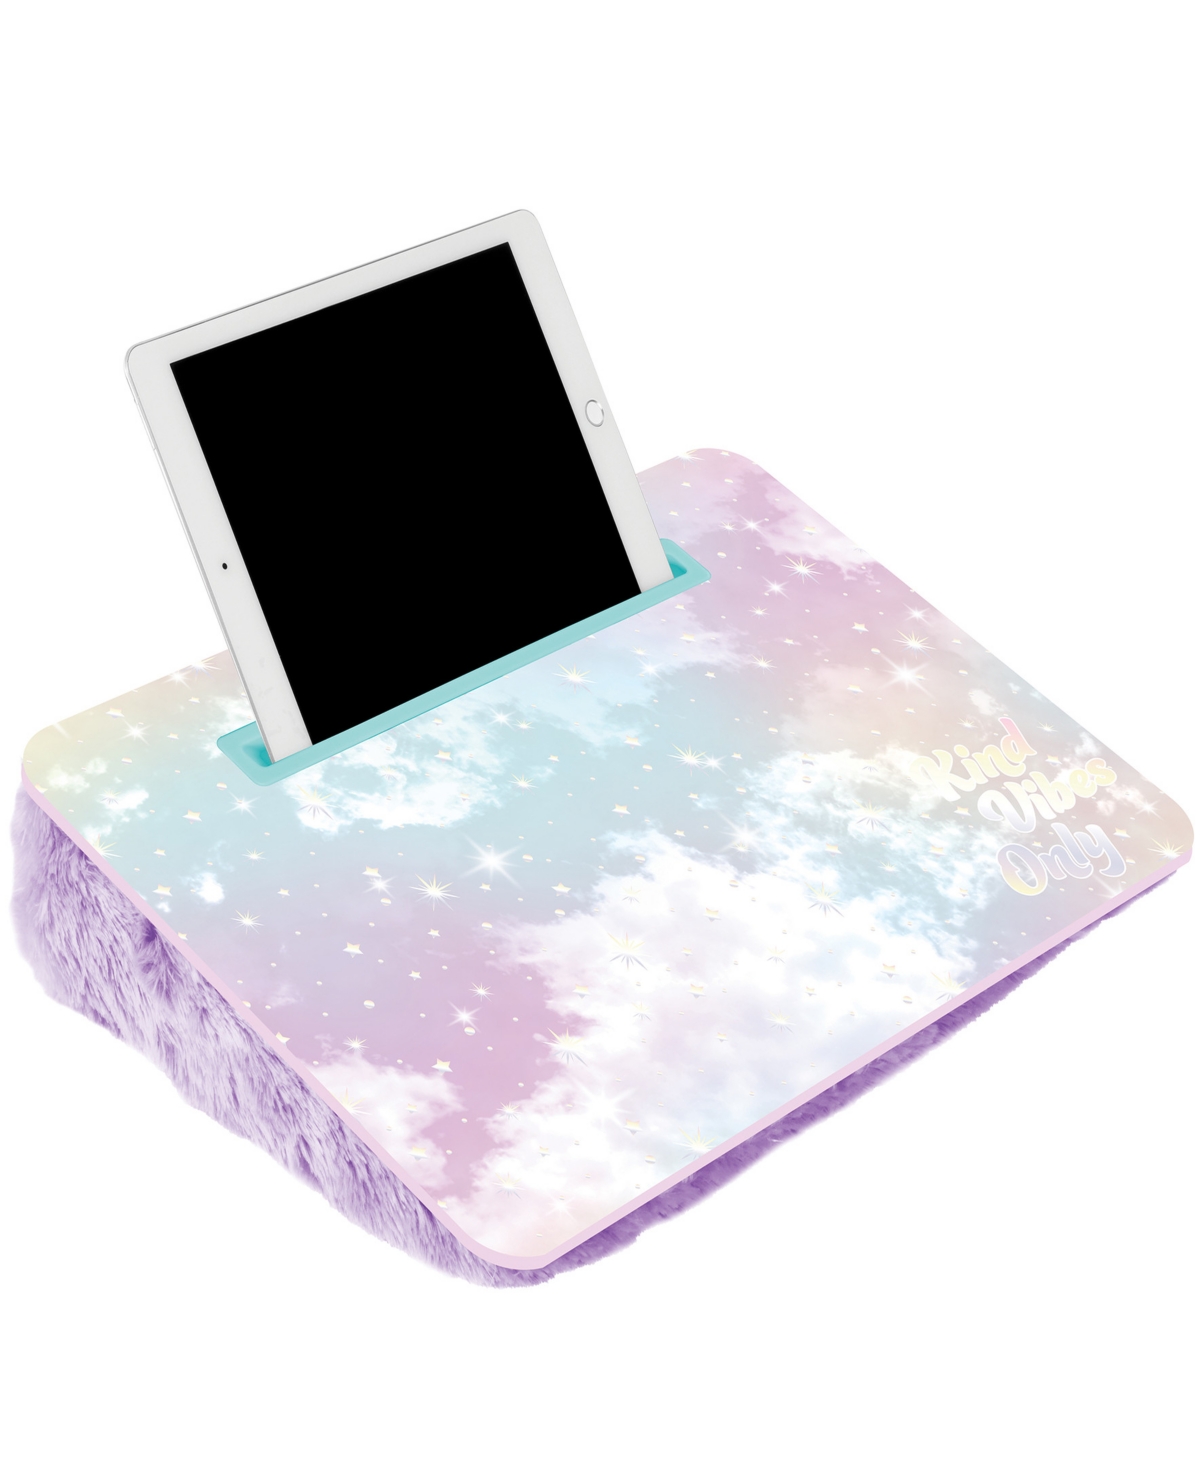 Shop Three Cheers For Girls 3c4g Holowave Lap Desk Purple Pastels, Make It Real, Tweens Girls, Portable Lap Pillow Desk With Han In Multi